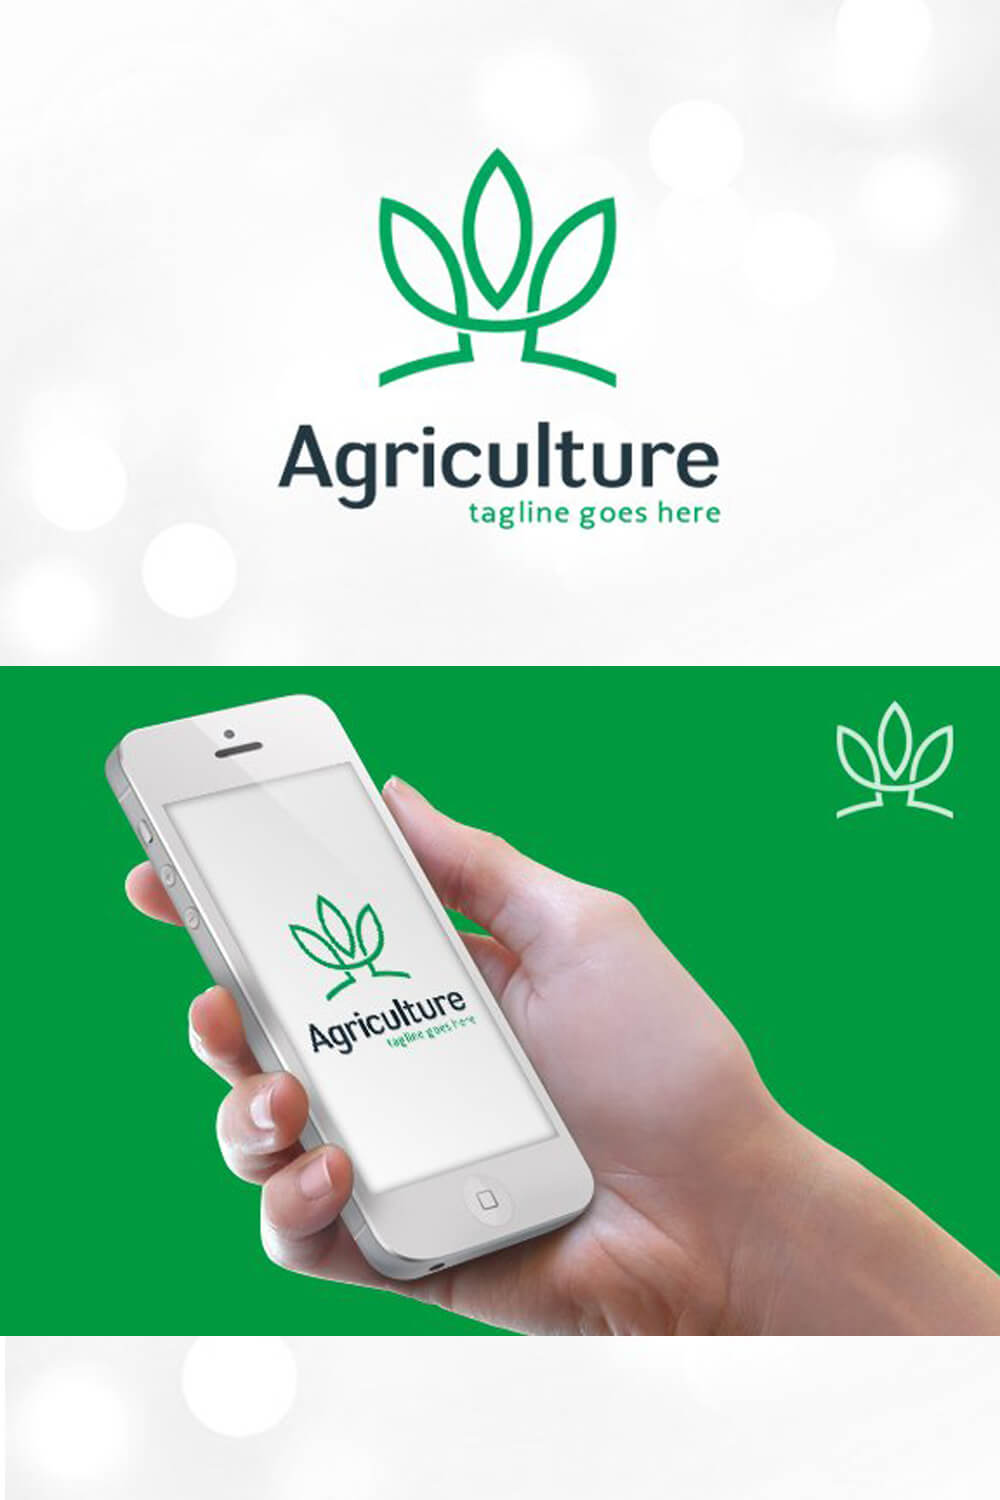 Agriculture logo consisting of three leaves connected into one sign.